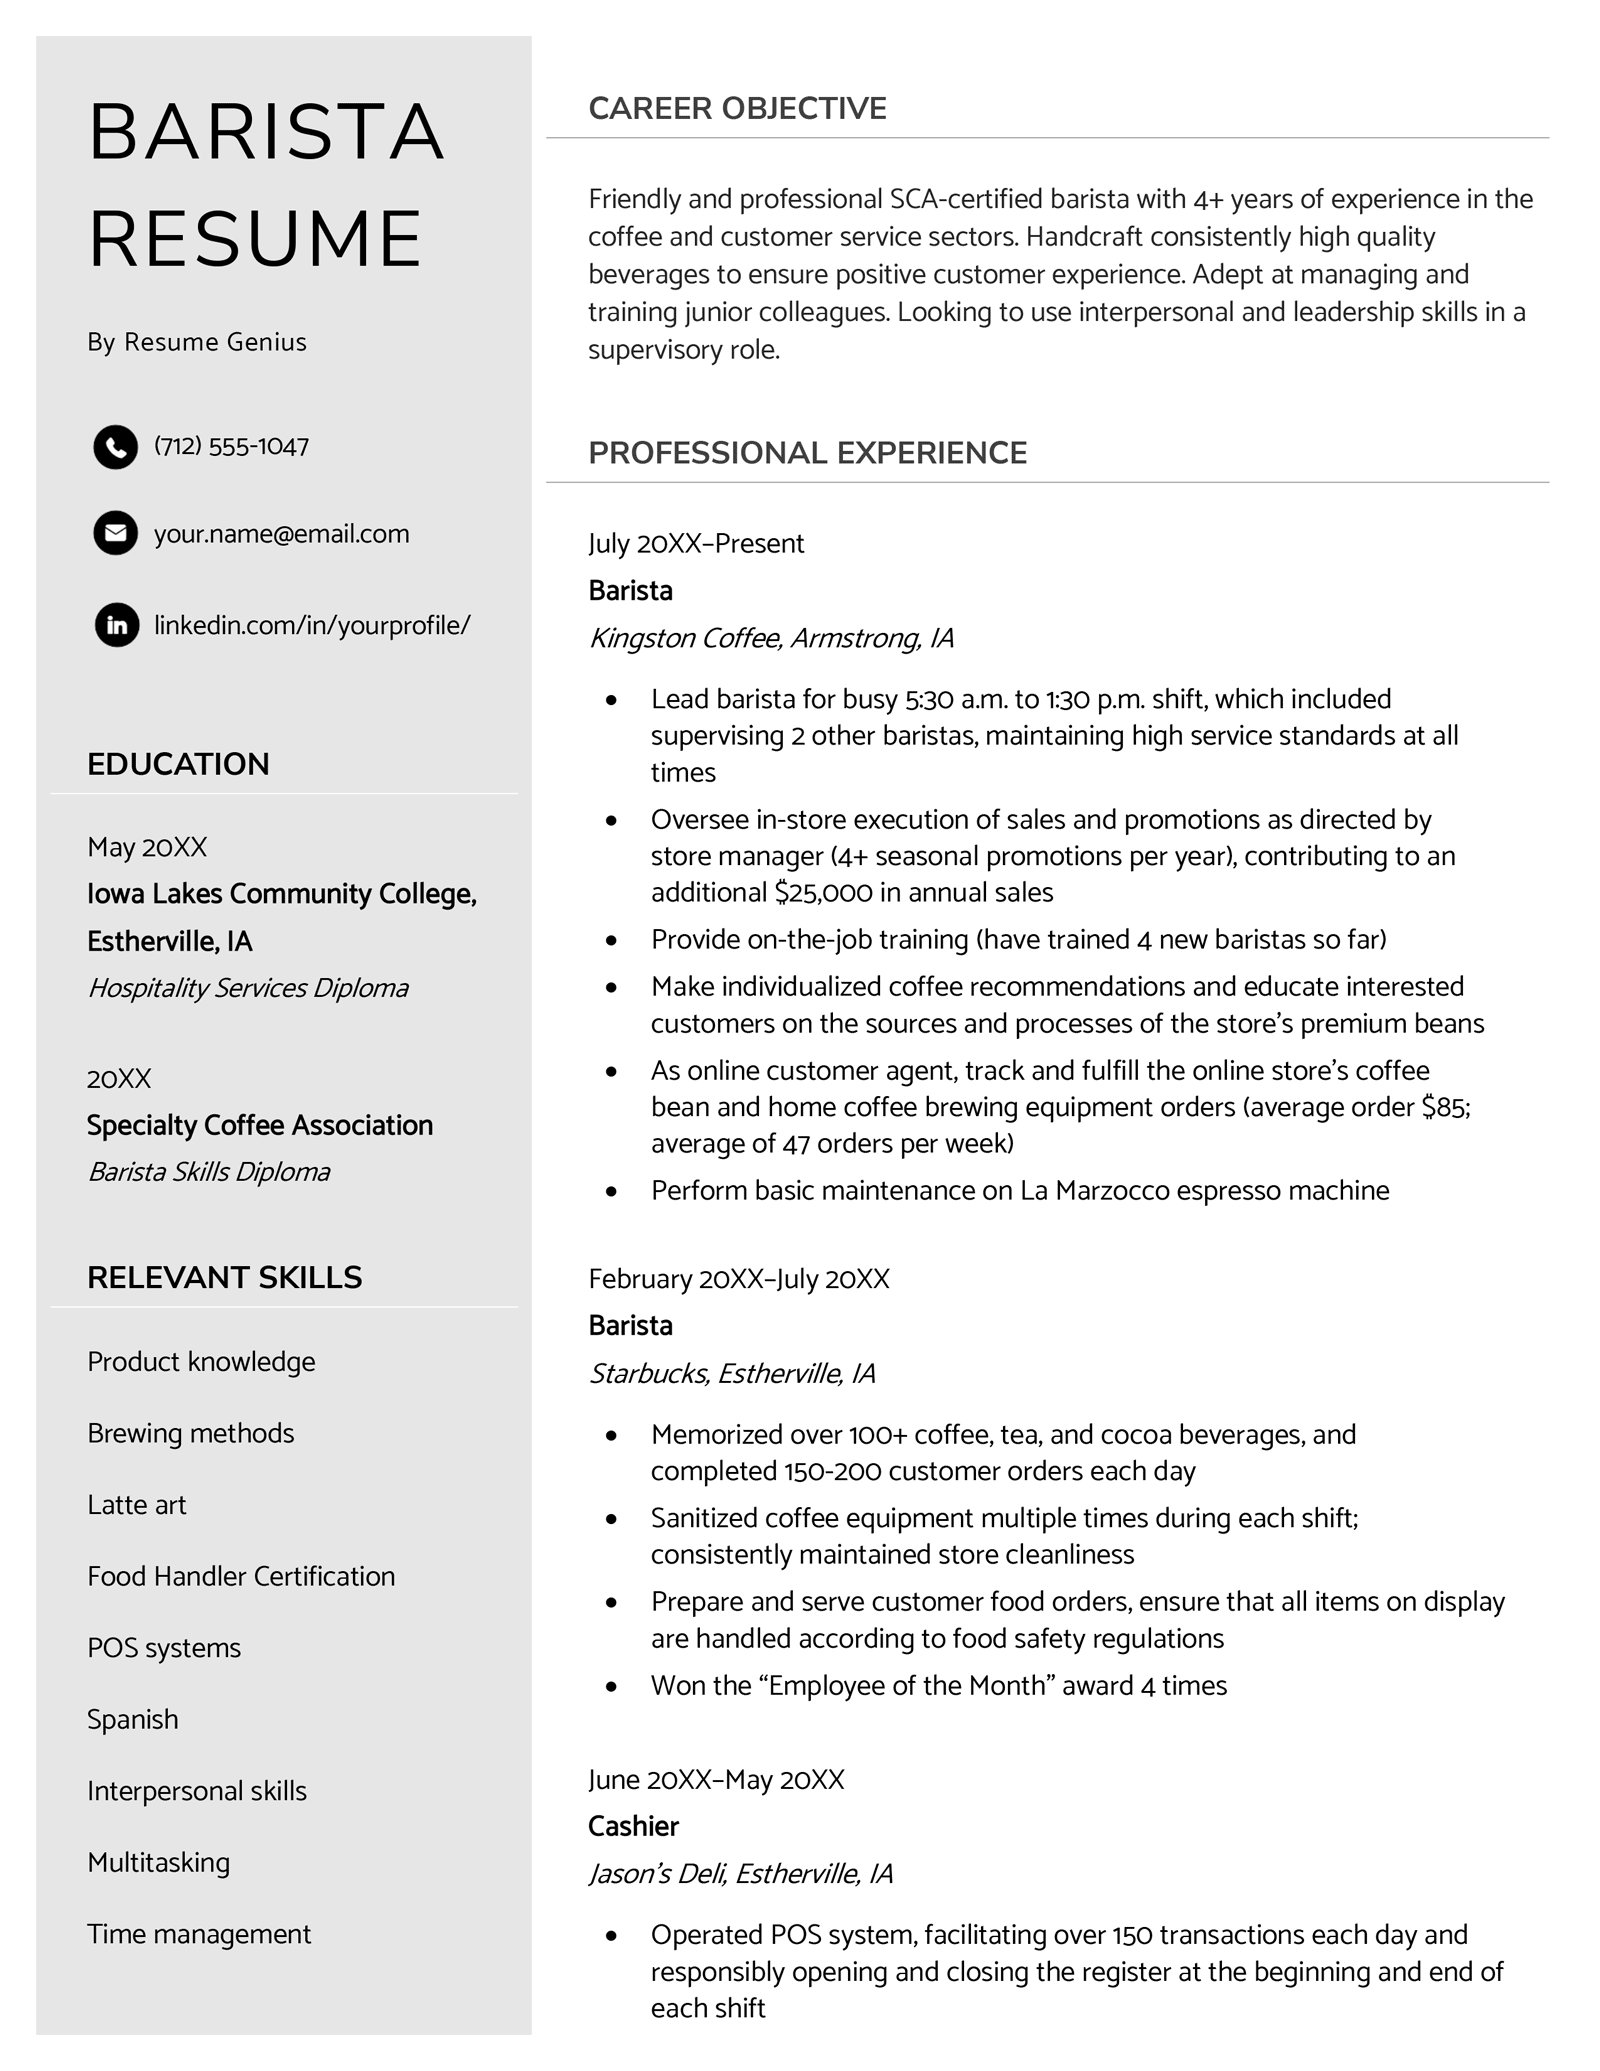 Example of a resume for a barista.